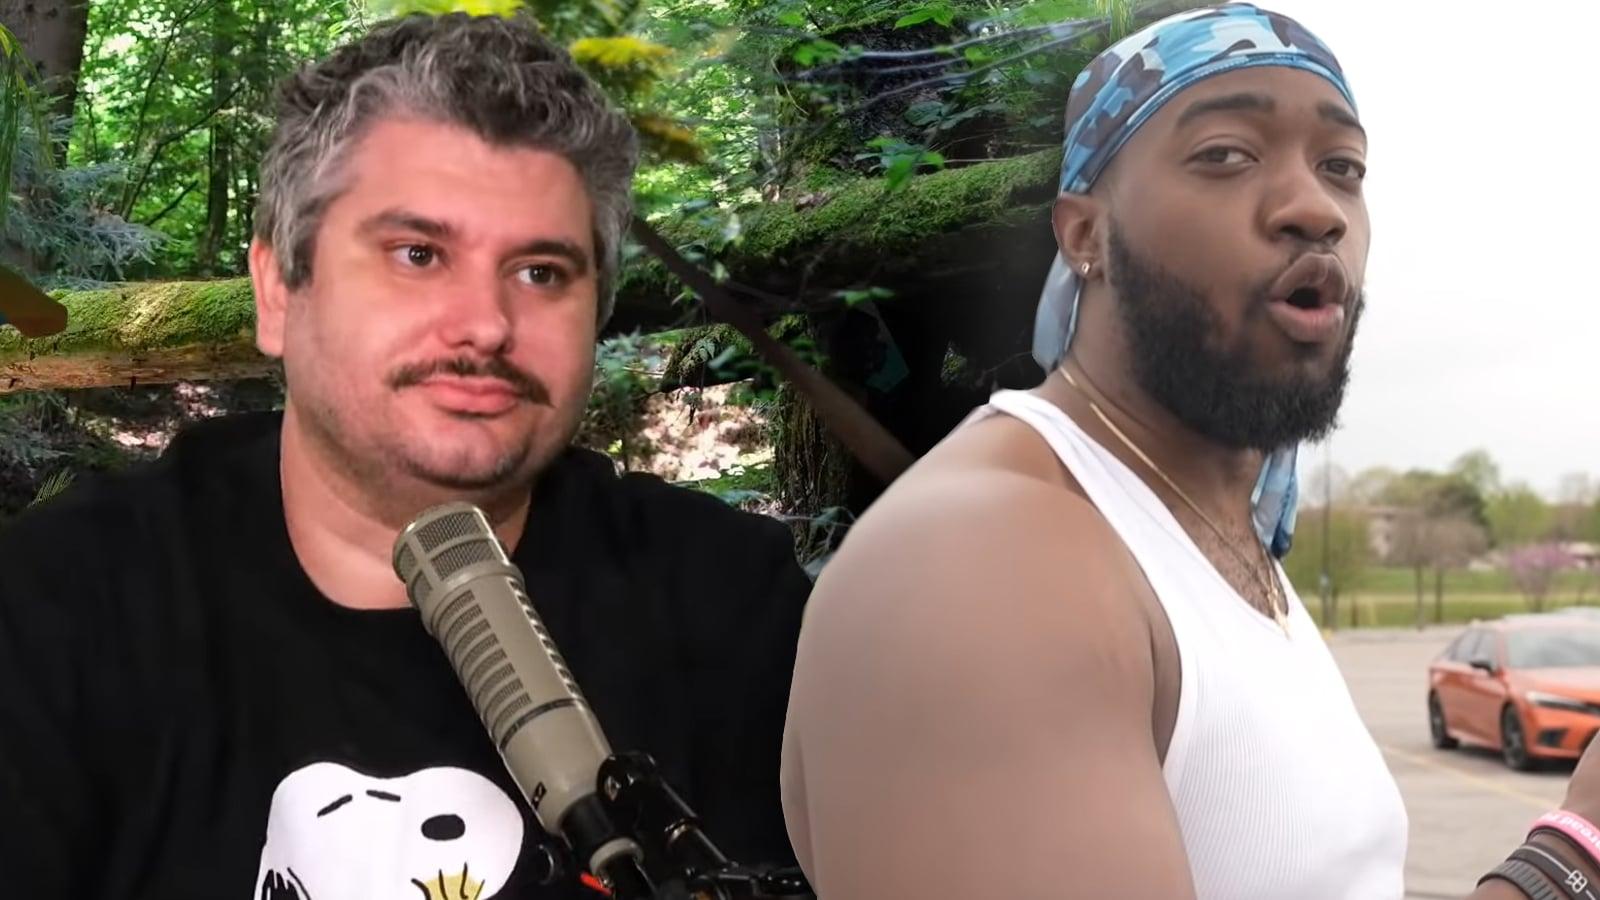 H3H3's Ethan Klein looking at JiDion